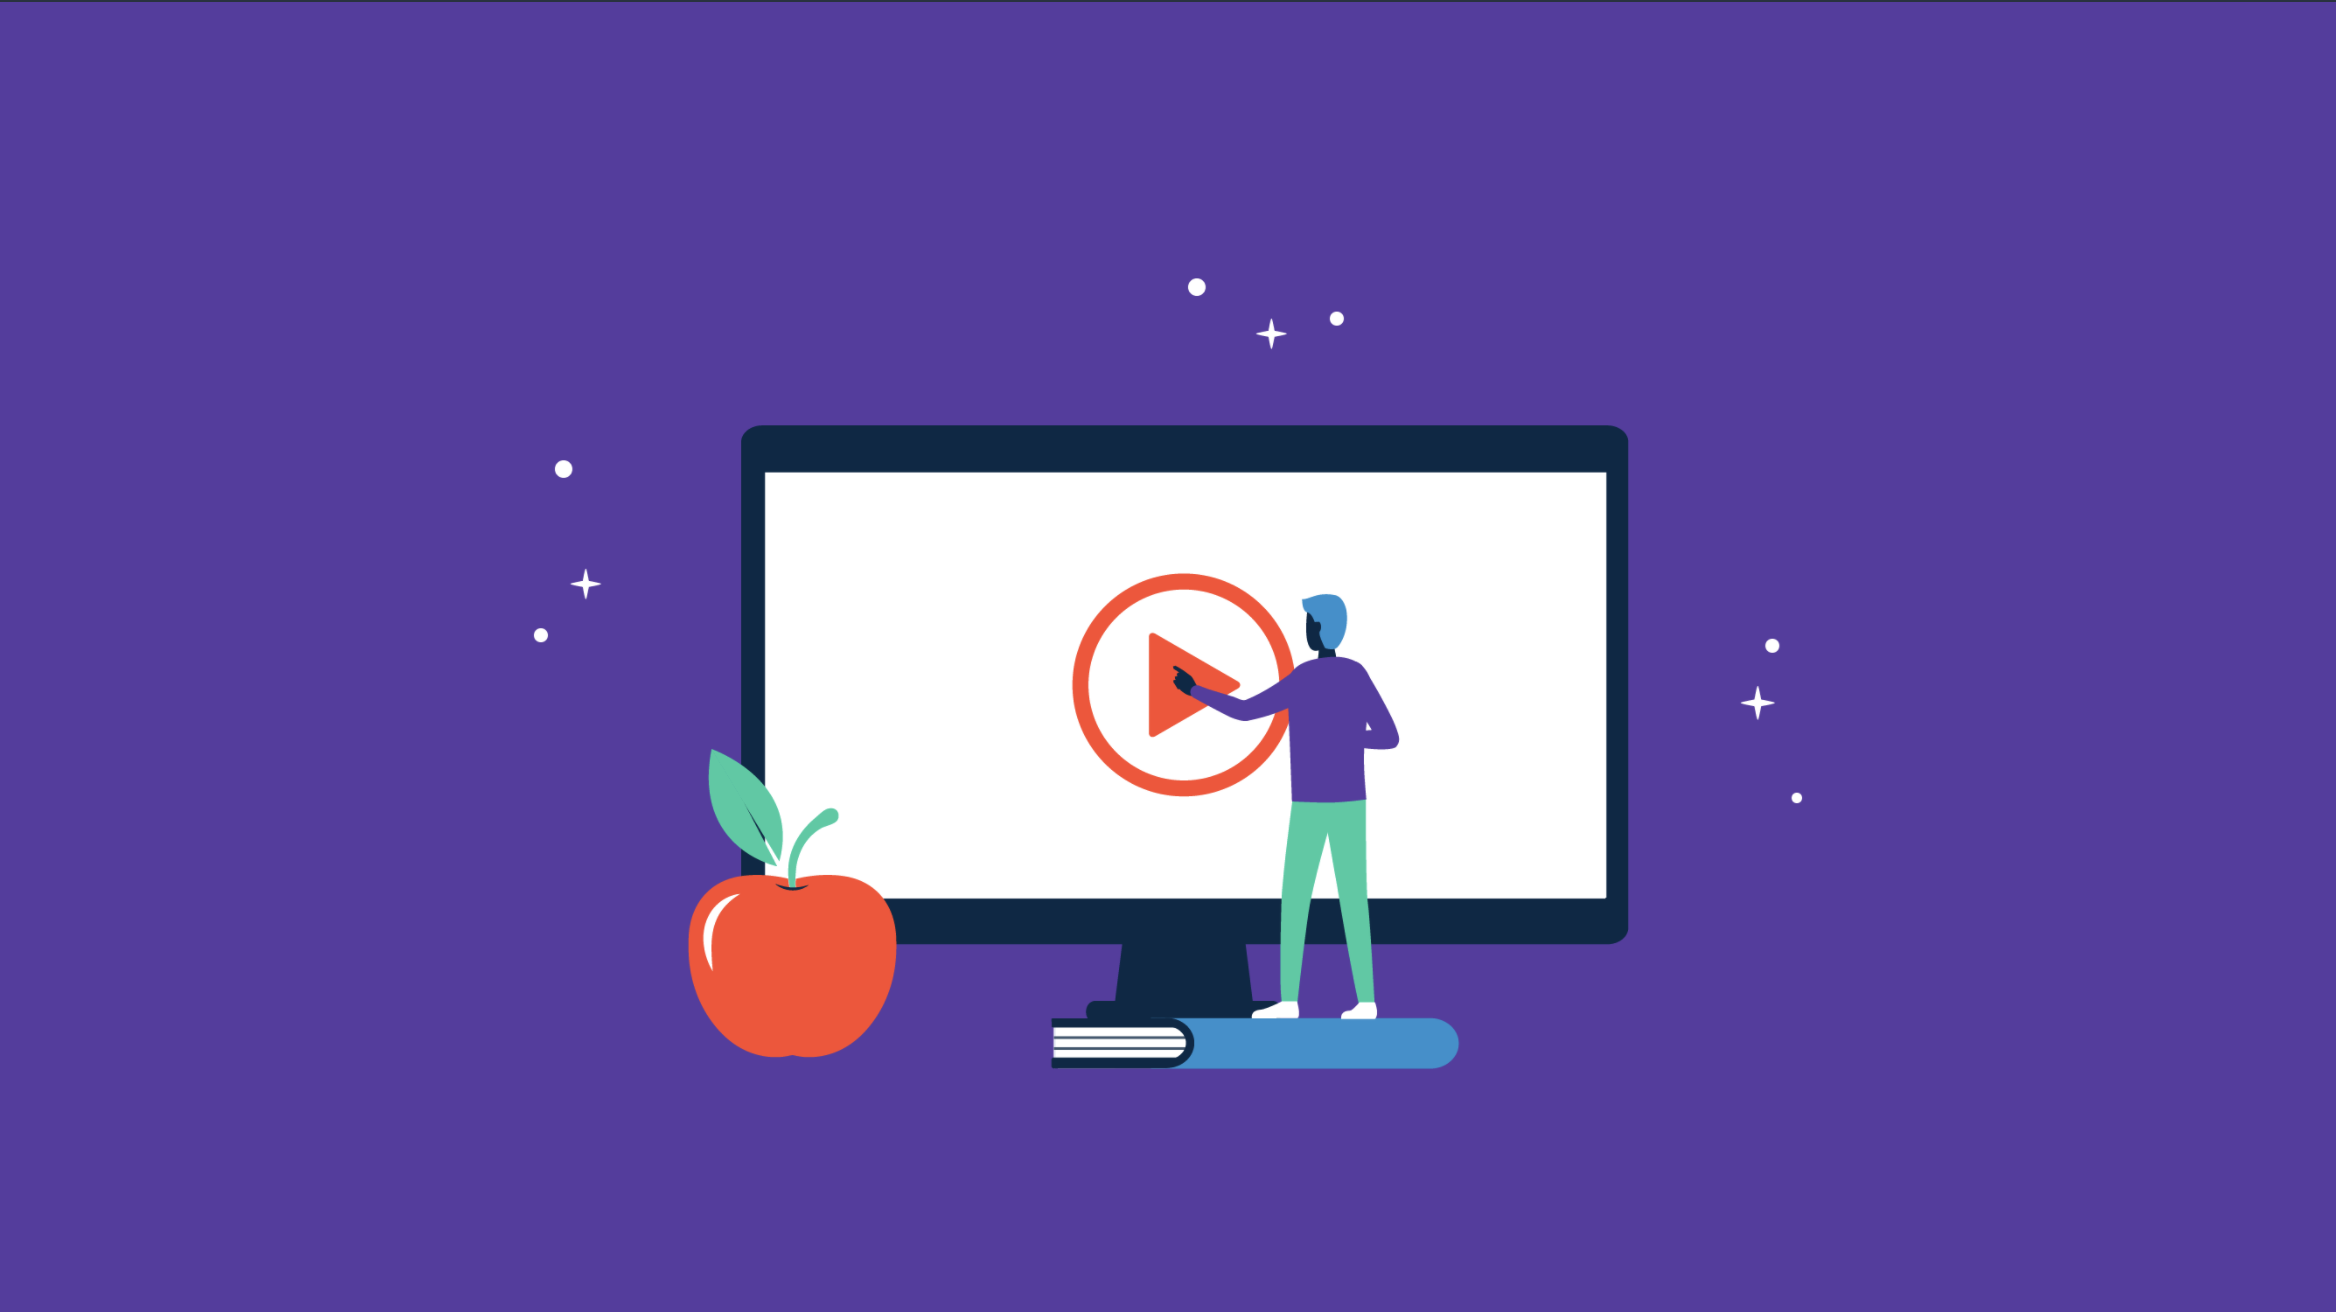 How to Produce eLearning Videos in a Smart, Compelling Way